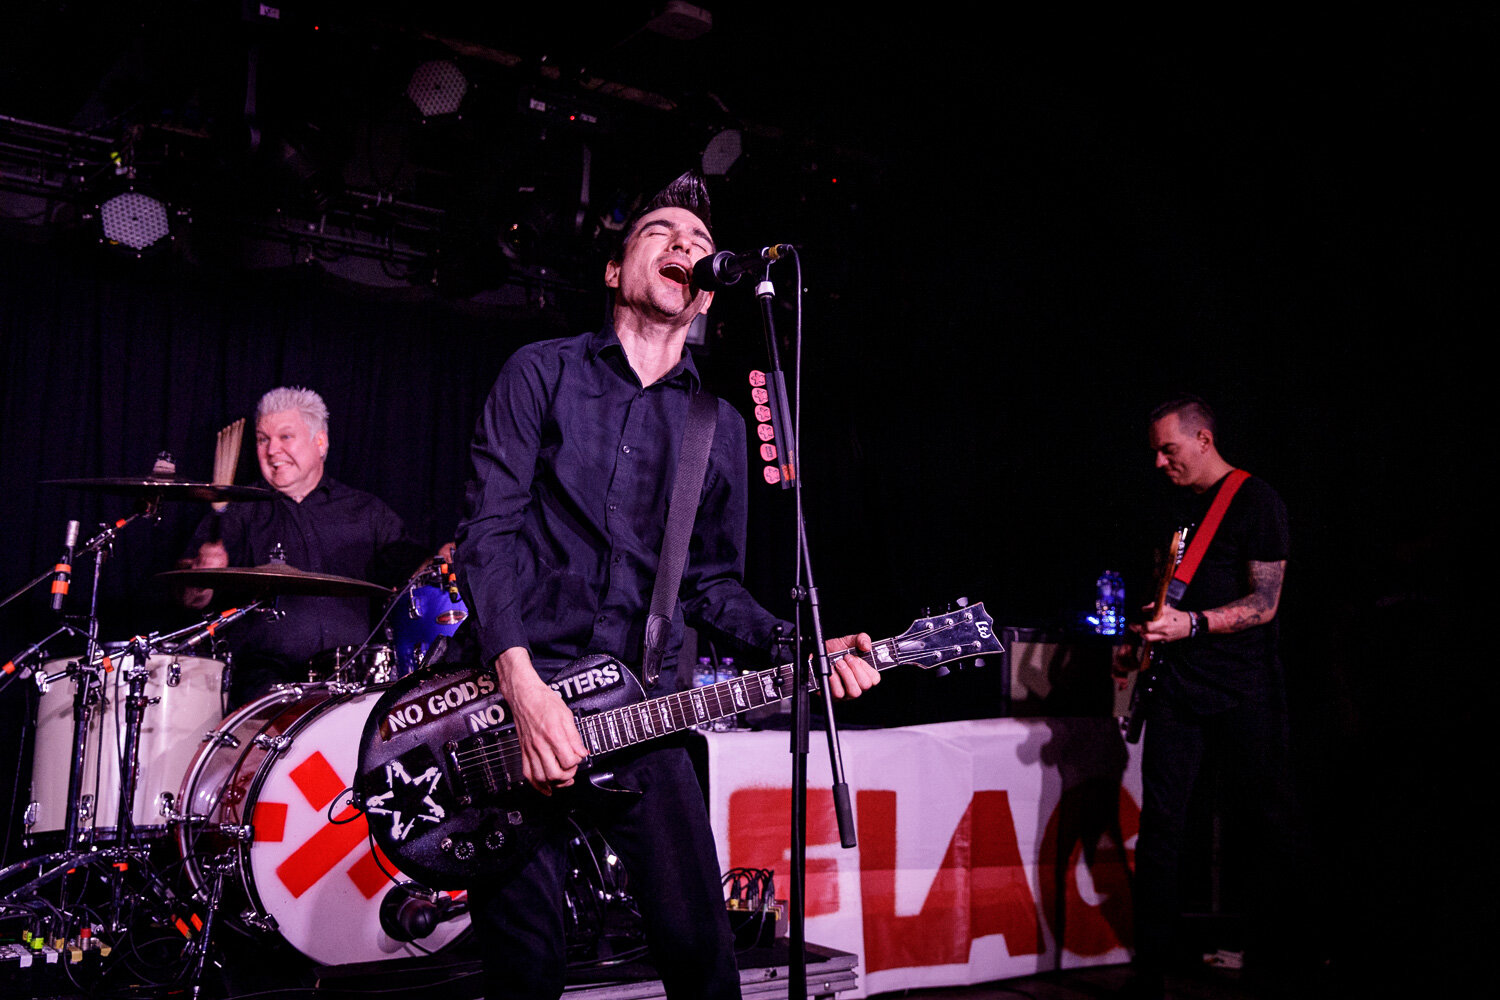 Anti-Flag at Academy Club in Manchester on February 5th 2020 